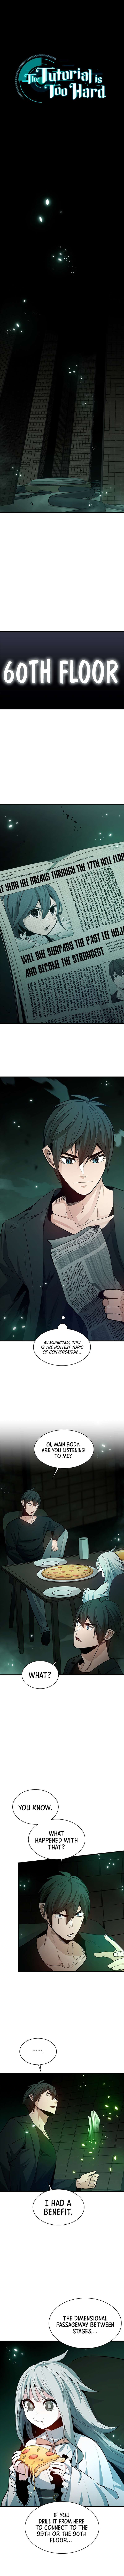 The Tutorial is Too Hard - chapter 9 - Manhwa Clan